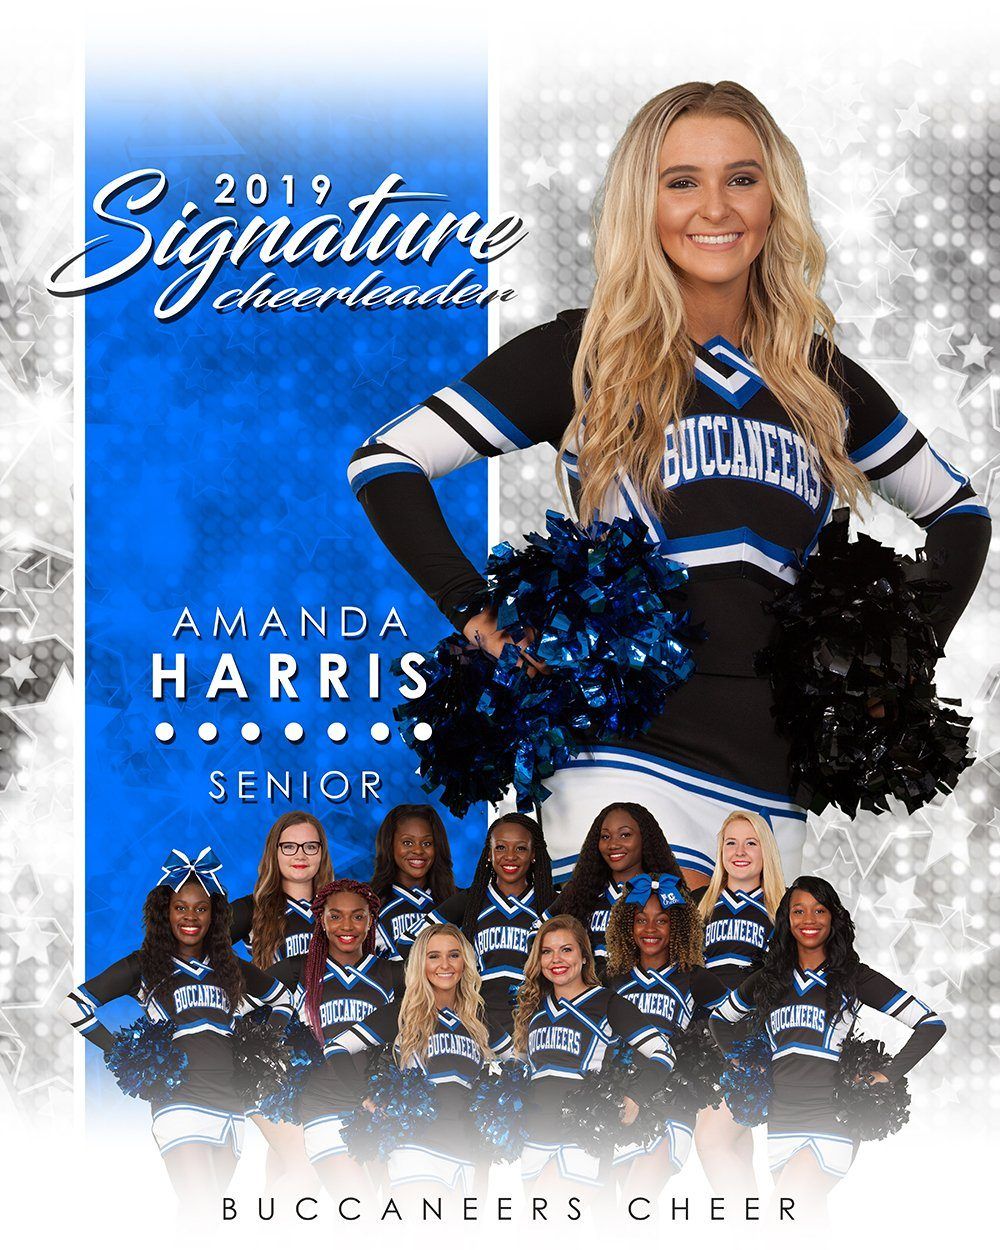 Cheer - v.1 - Signature Player - V T&I Poster/Banner-Photoshop Template - Photo Solutions